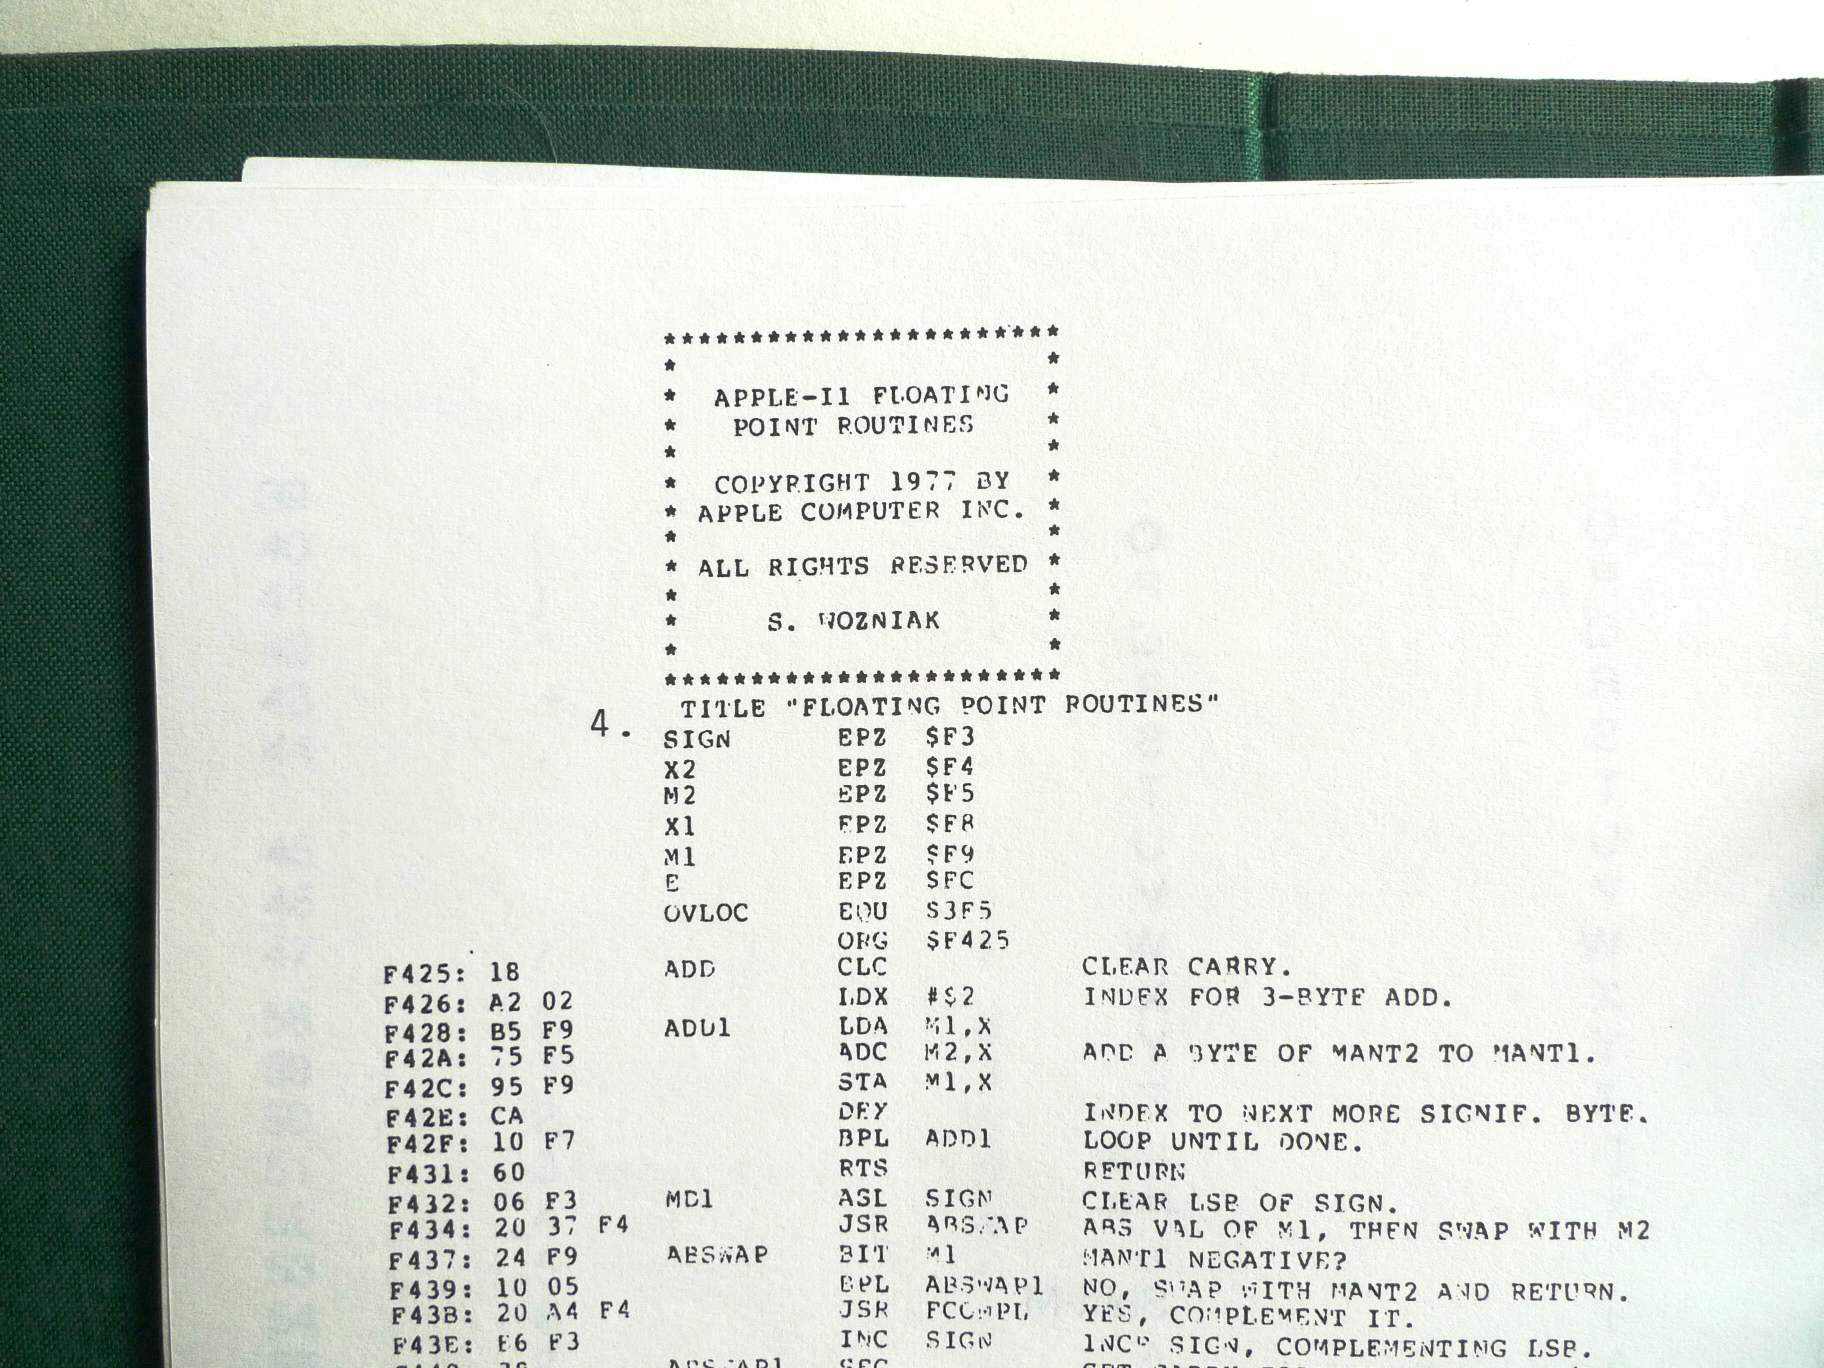 Wozniak's floating point routines. Dr. Dobb's Journal published the floating-point routines. They allowed the Apple II to calculate addition, subtraction, multiplication, division and logarithms.